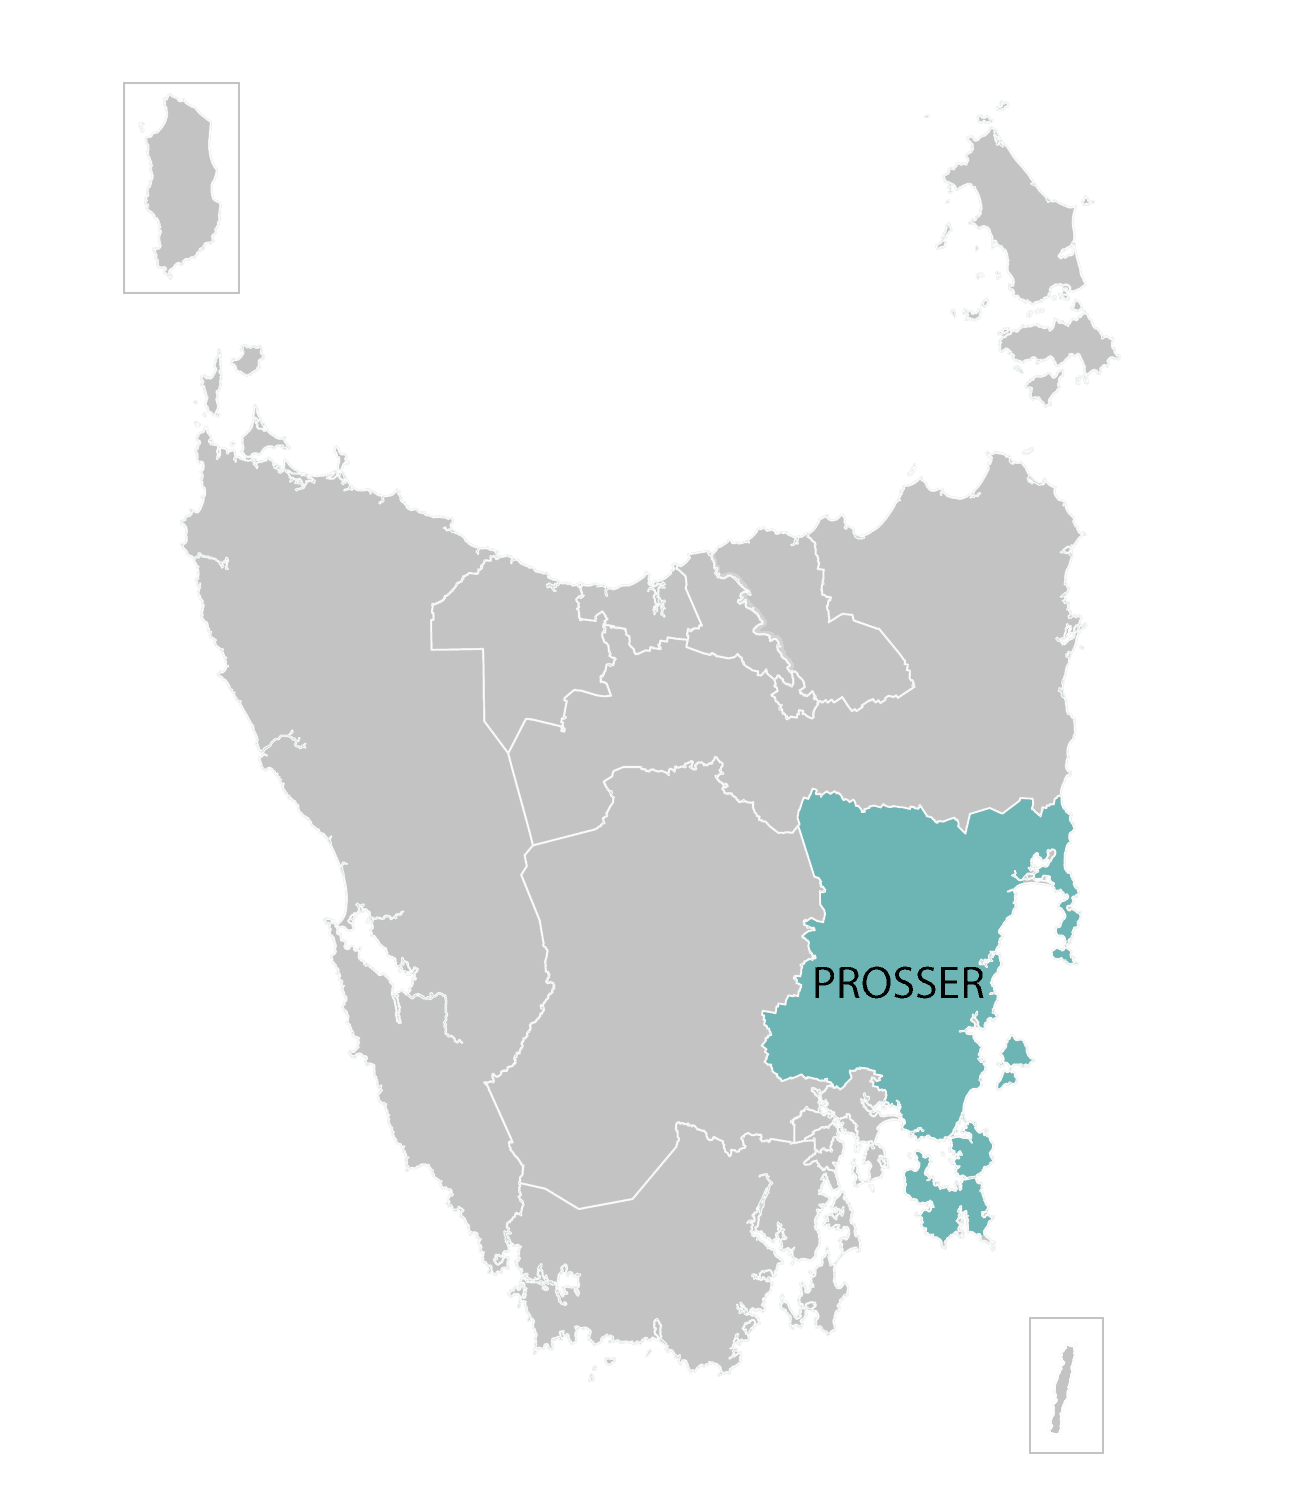 Prosser division highlighted on illustrated map of Tasmania